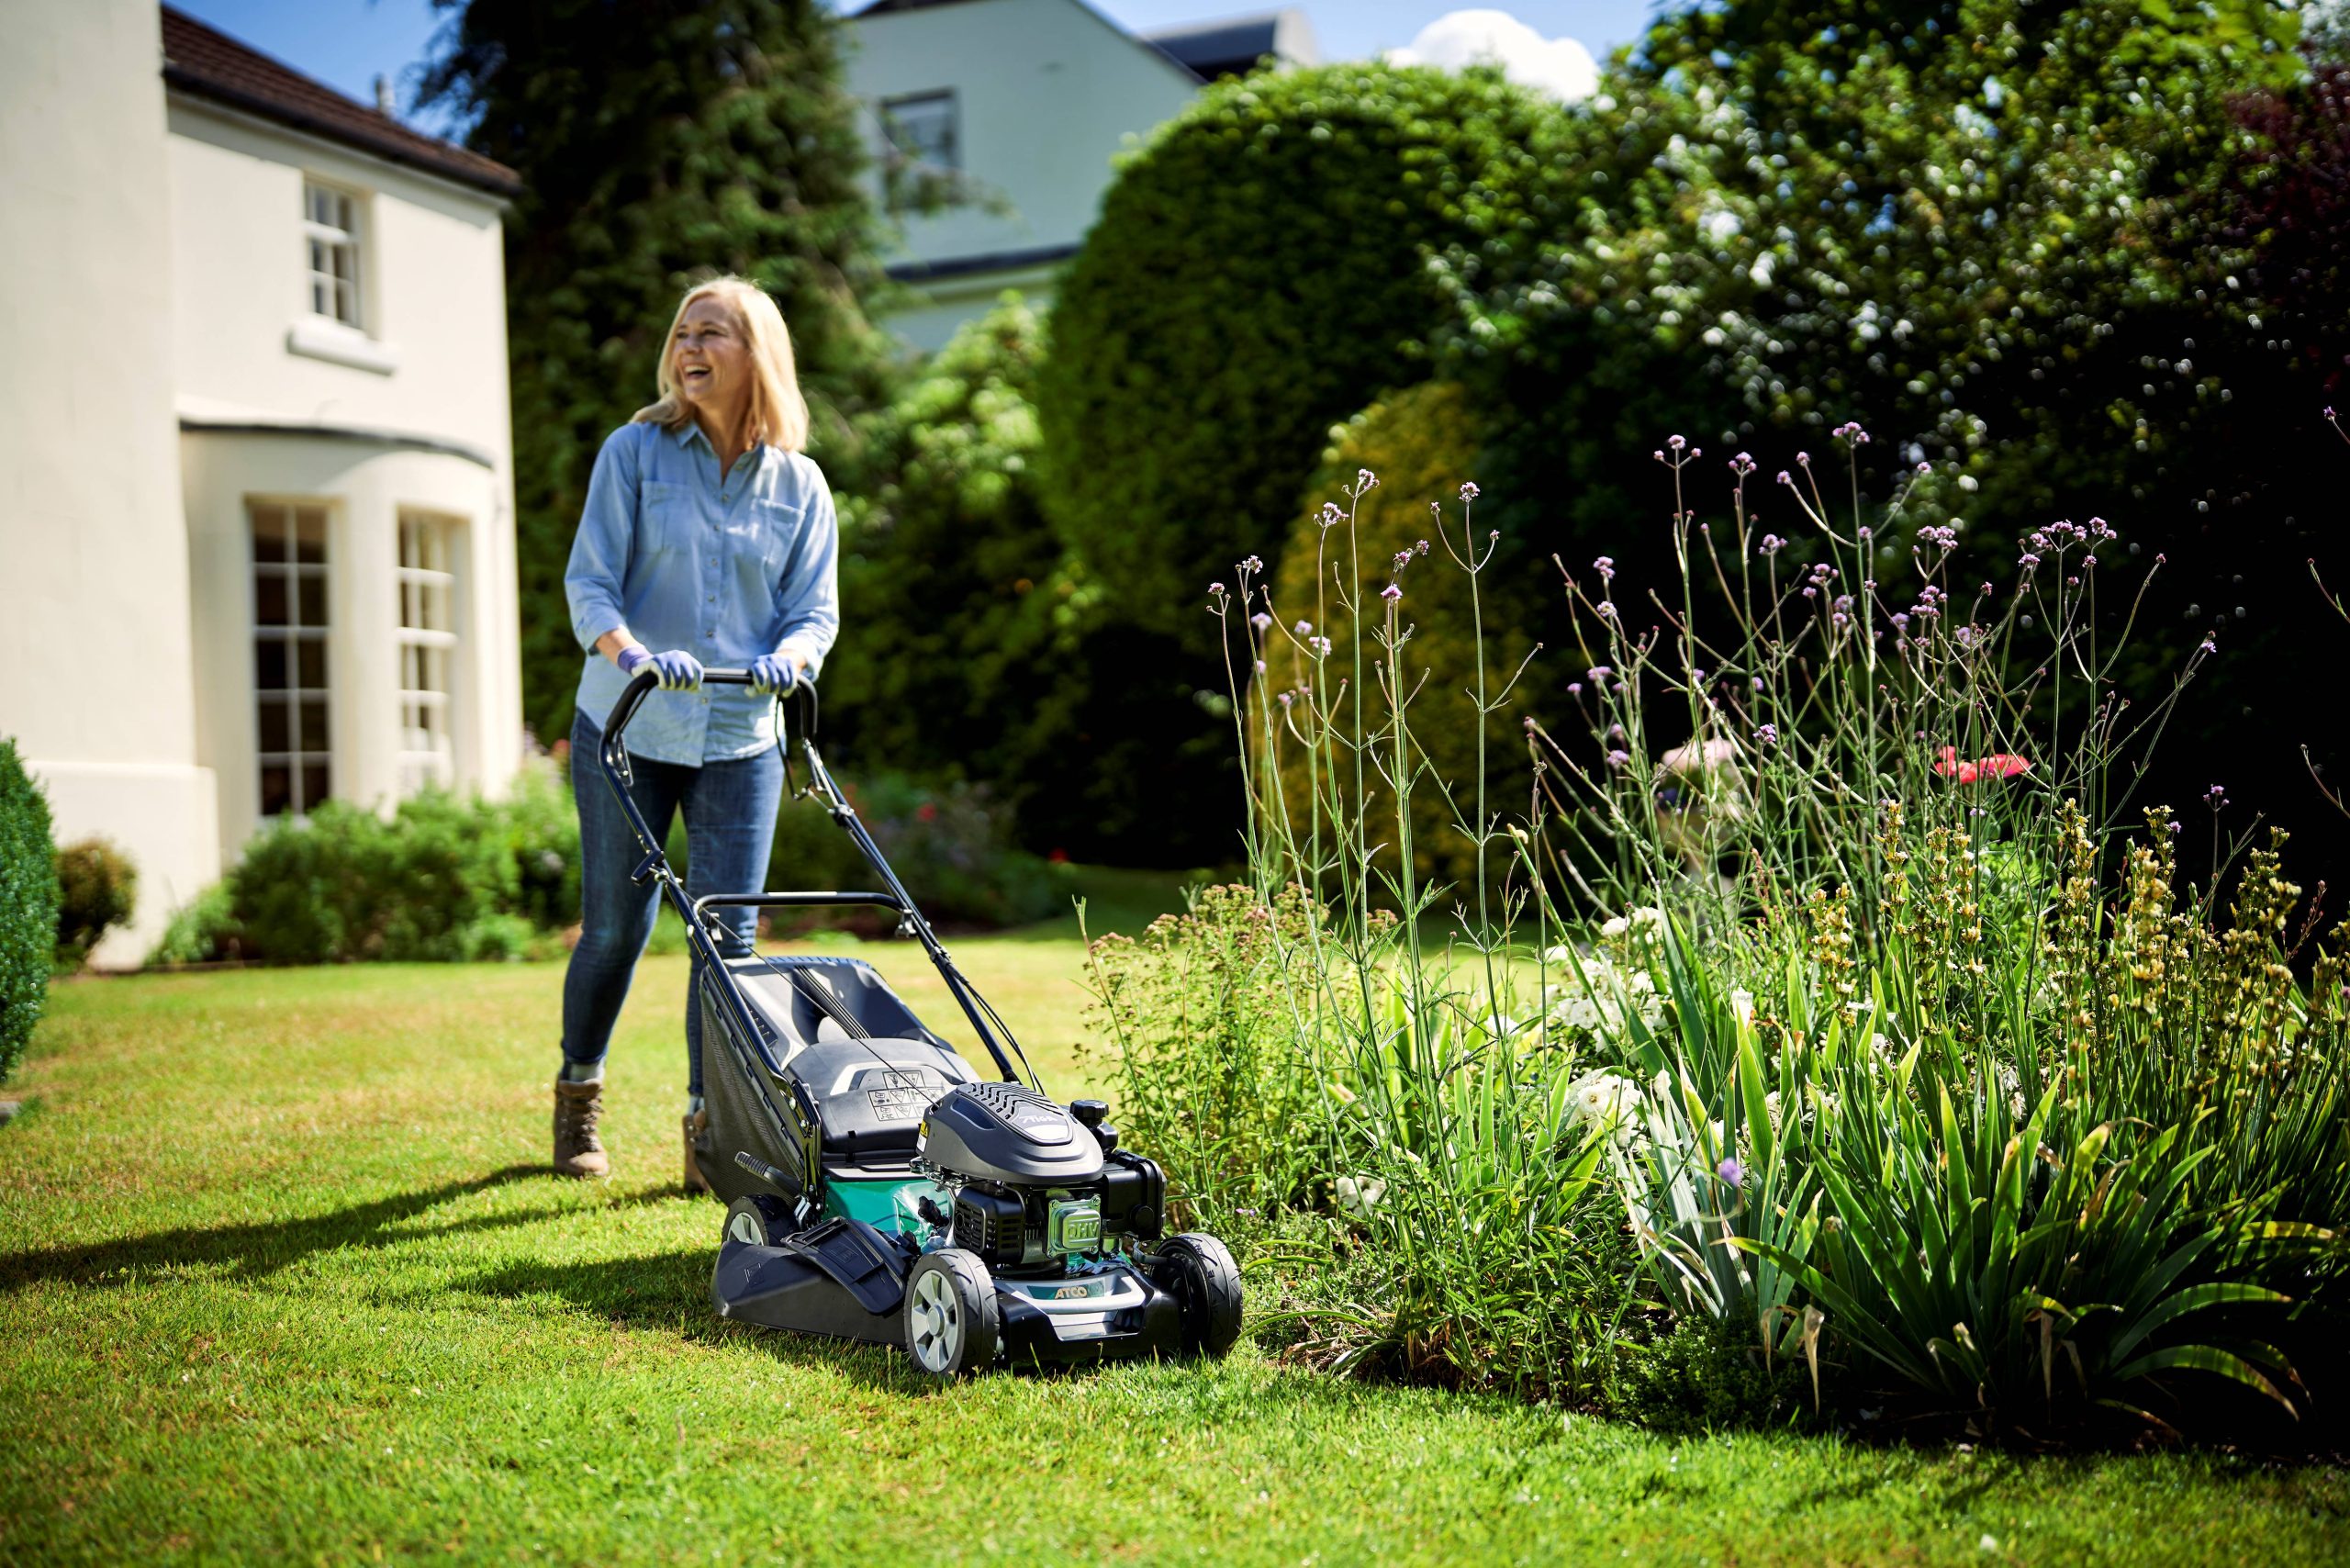 woman mowing lawn with green lawnmower